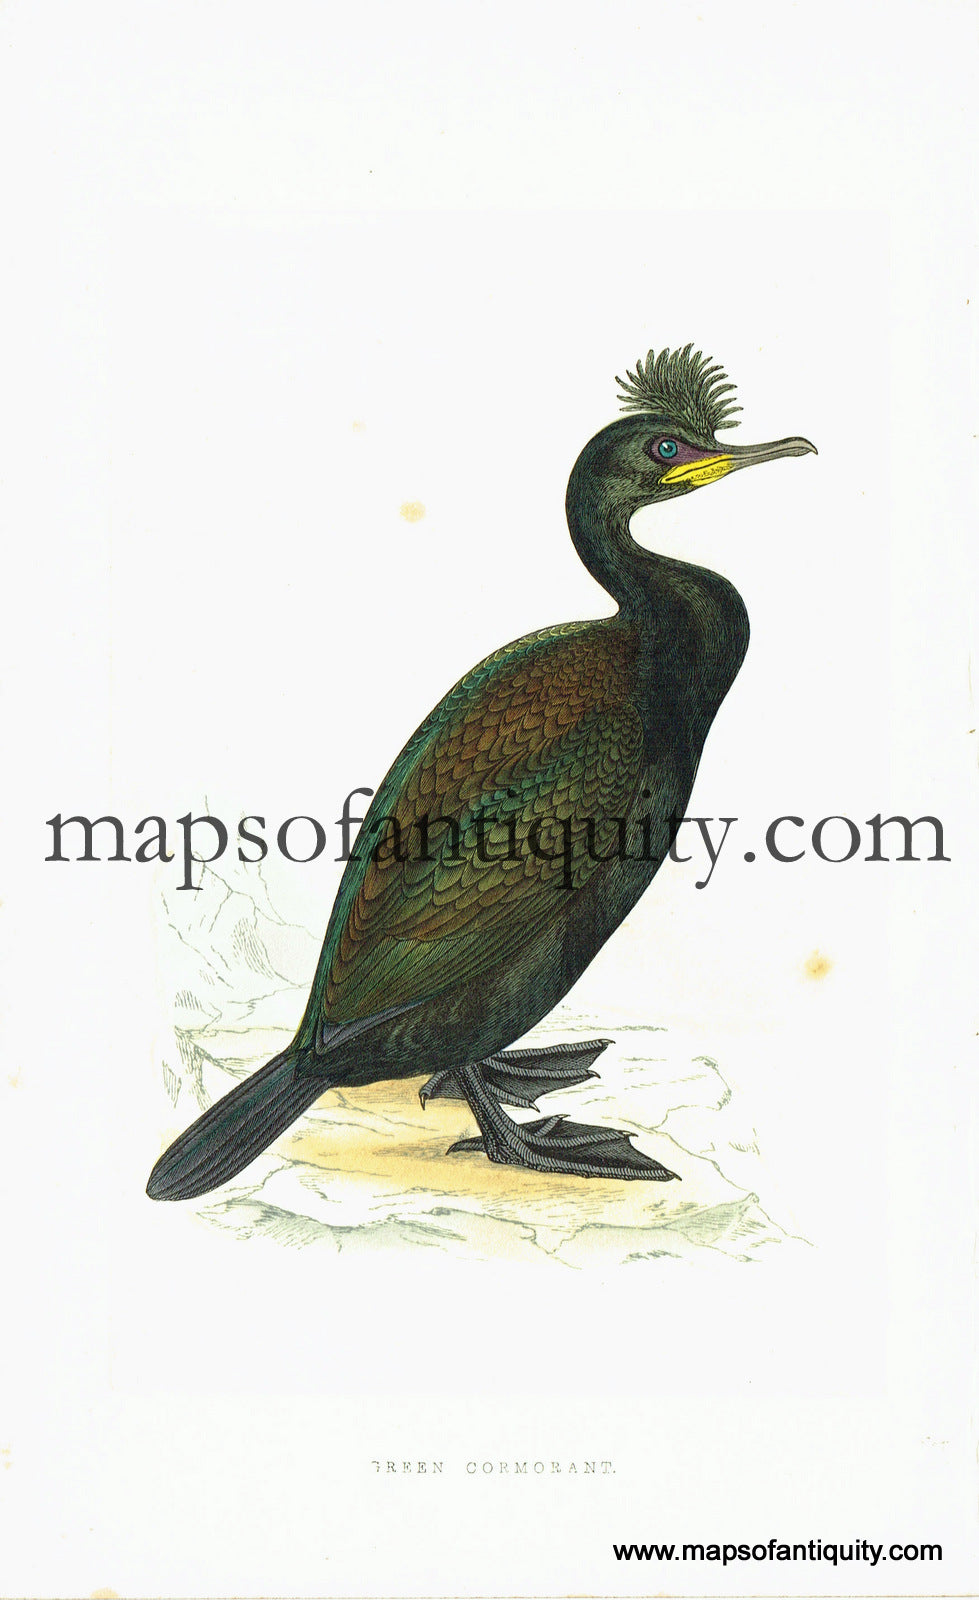 Antique-Hand-Colored-Engraved-Illustration-Green-Cormorant-Antique-Prints-Natural-History-Birds-c.-1860-Morris-Maps-Of-Antiquity